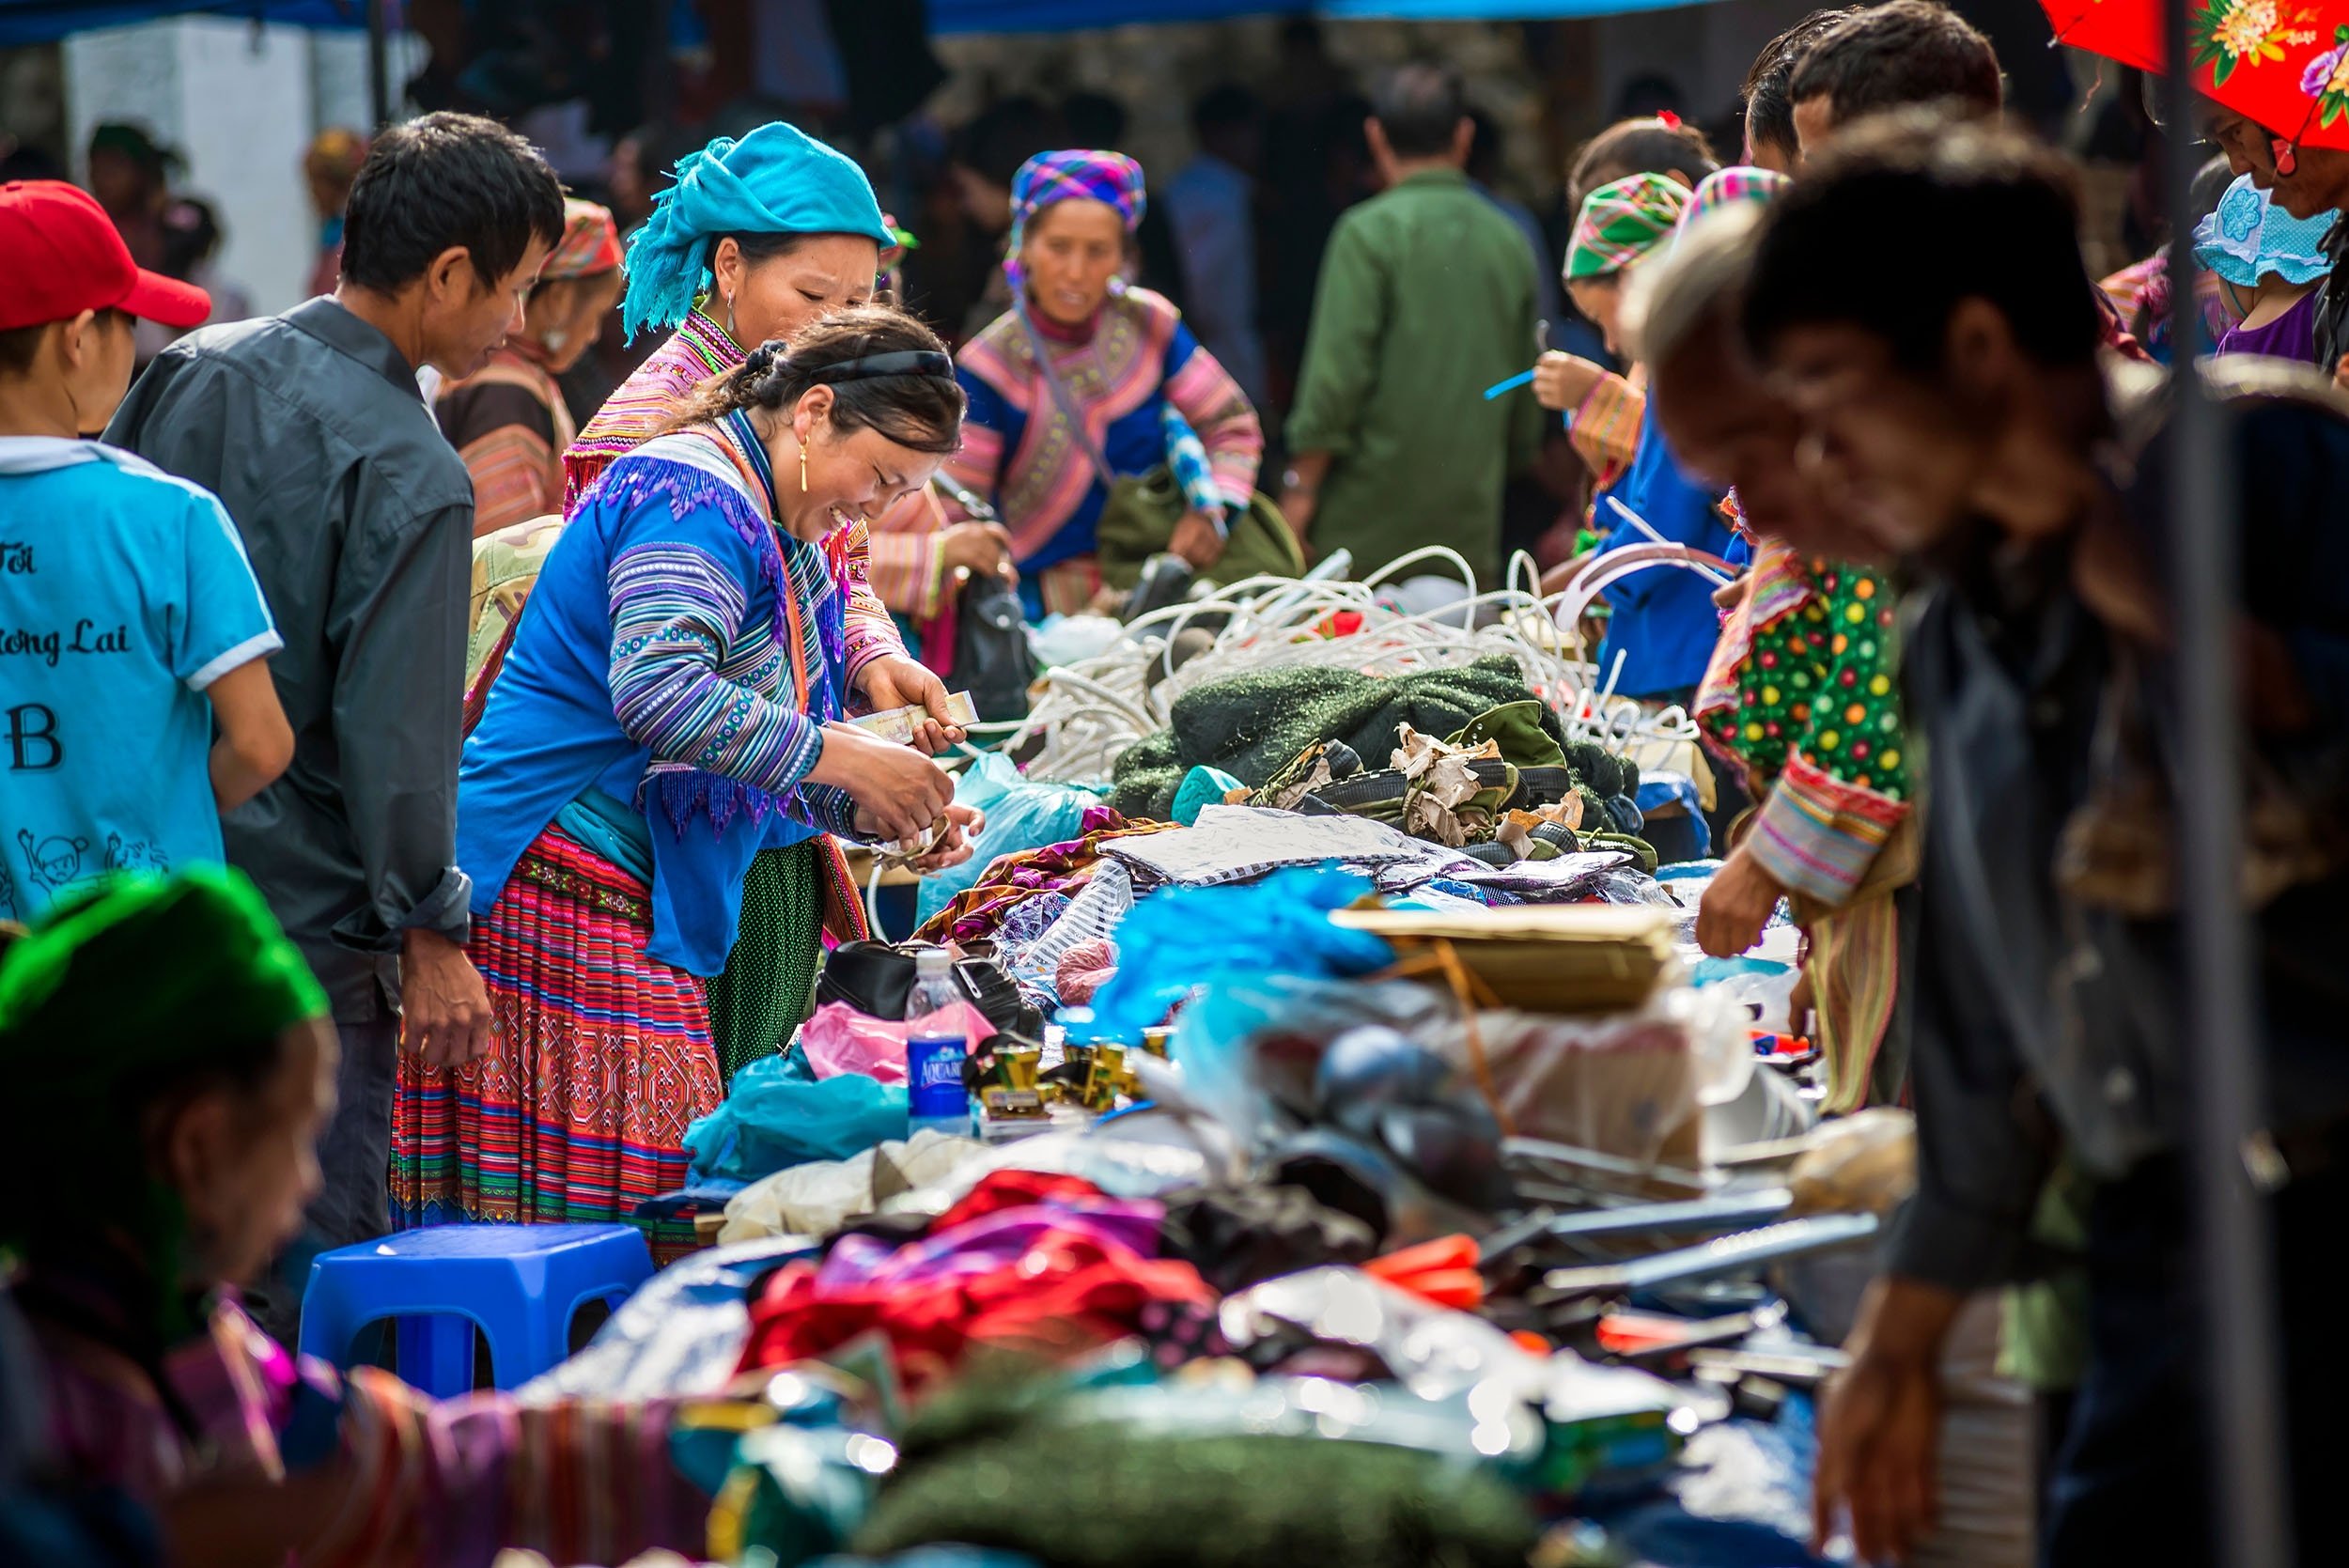 Hmong minority people can be seen trading colorful clothes and fabrics at the largest local sunday market in Bac Ha, Lao Cai province, northwestern Vietnam, Sept. 14, 2014. (Shutterstock Photo)